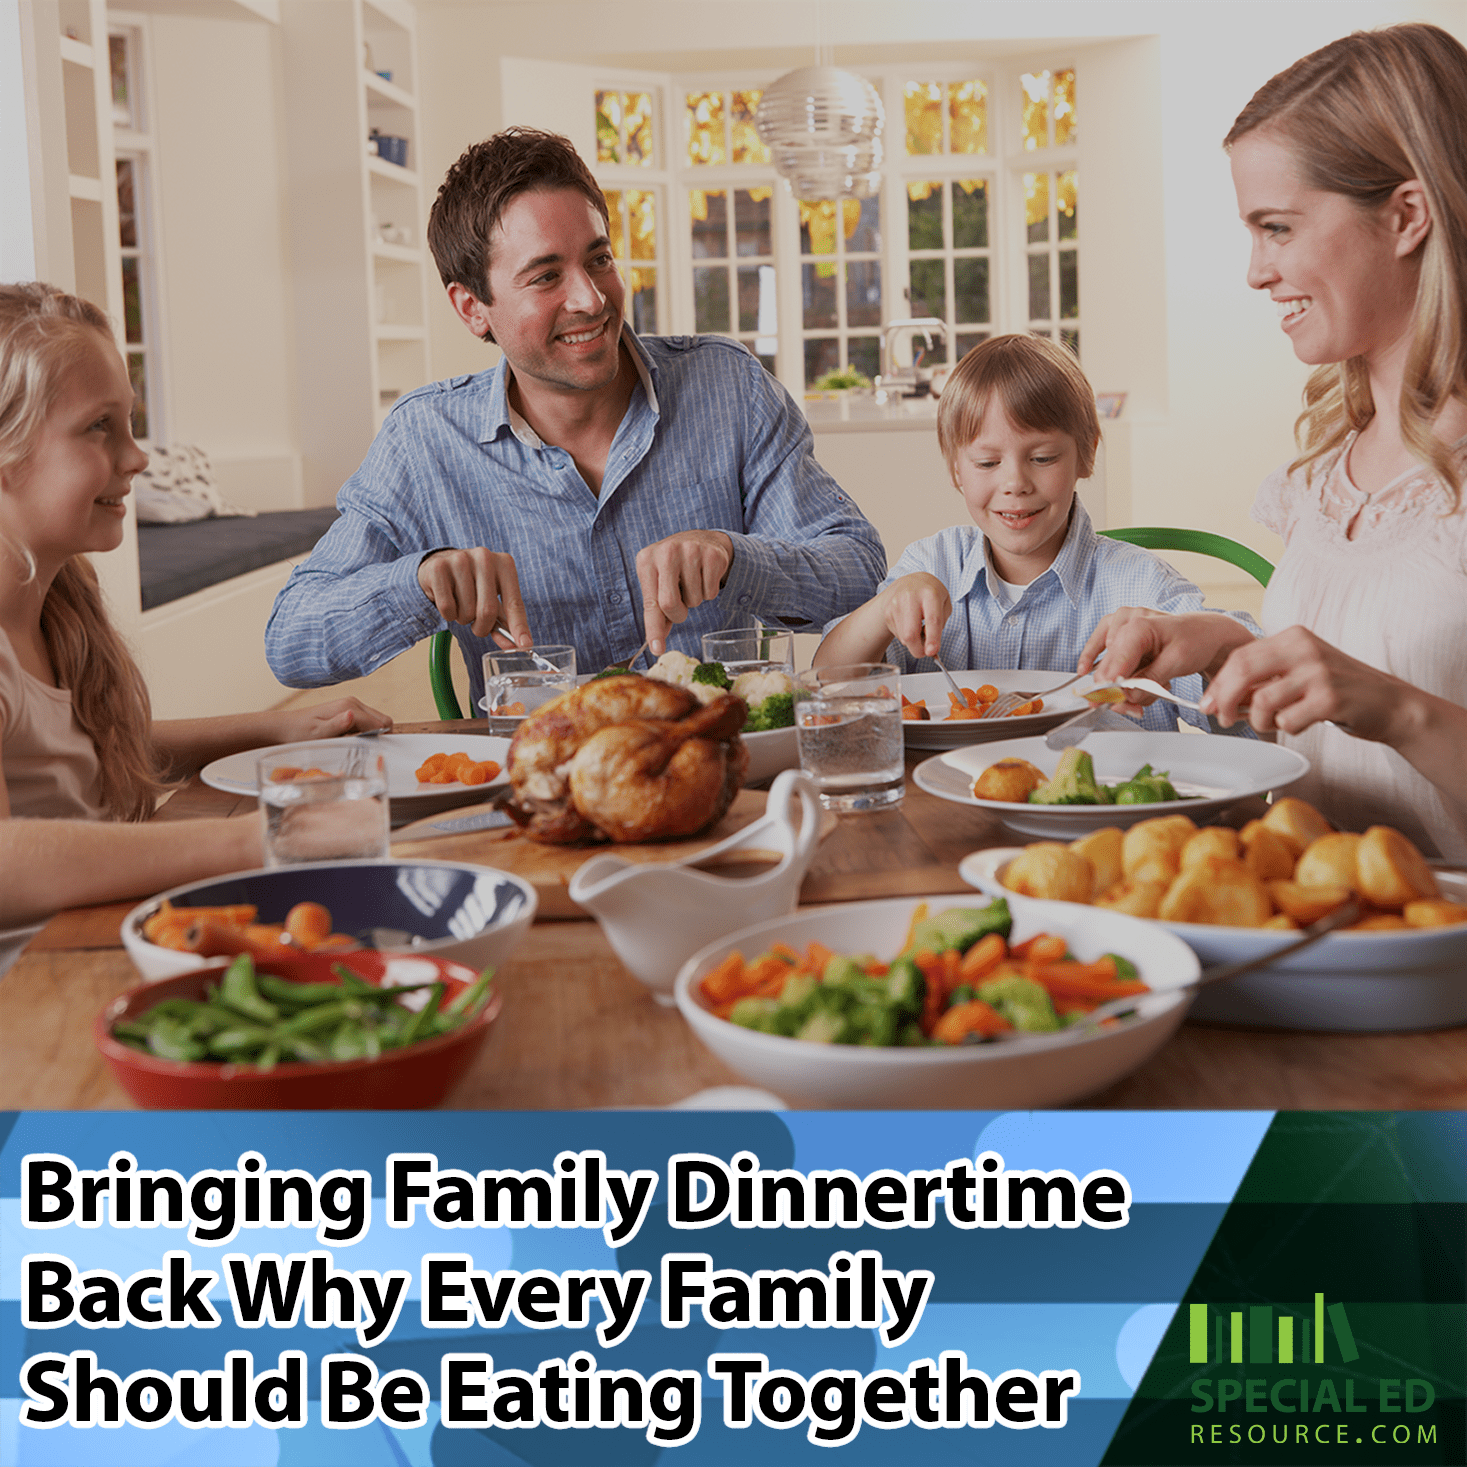 Family dinnertime with the whole family eating together and enjoying it!